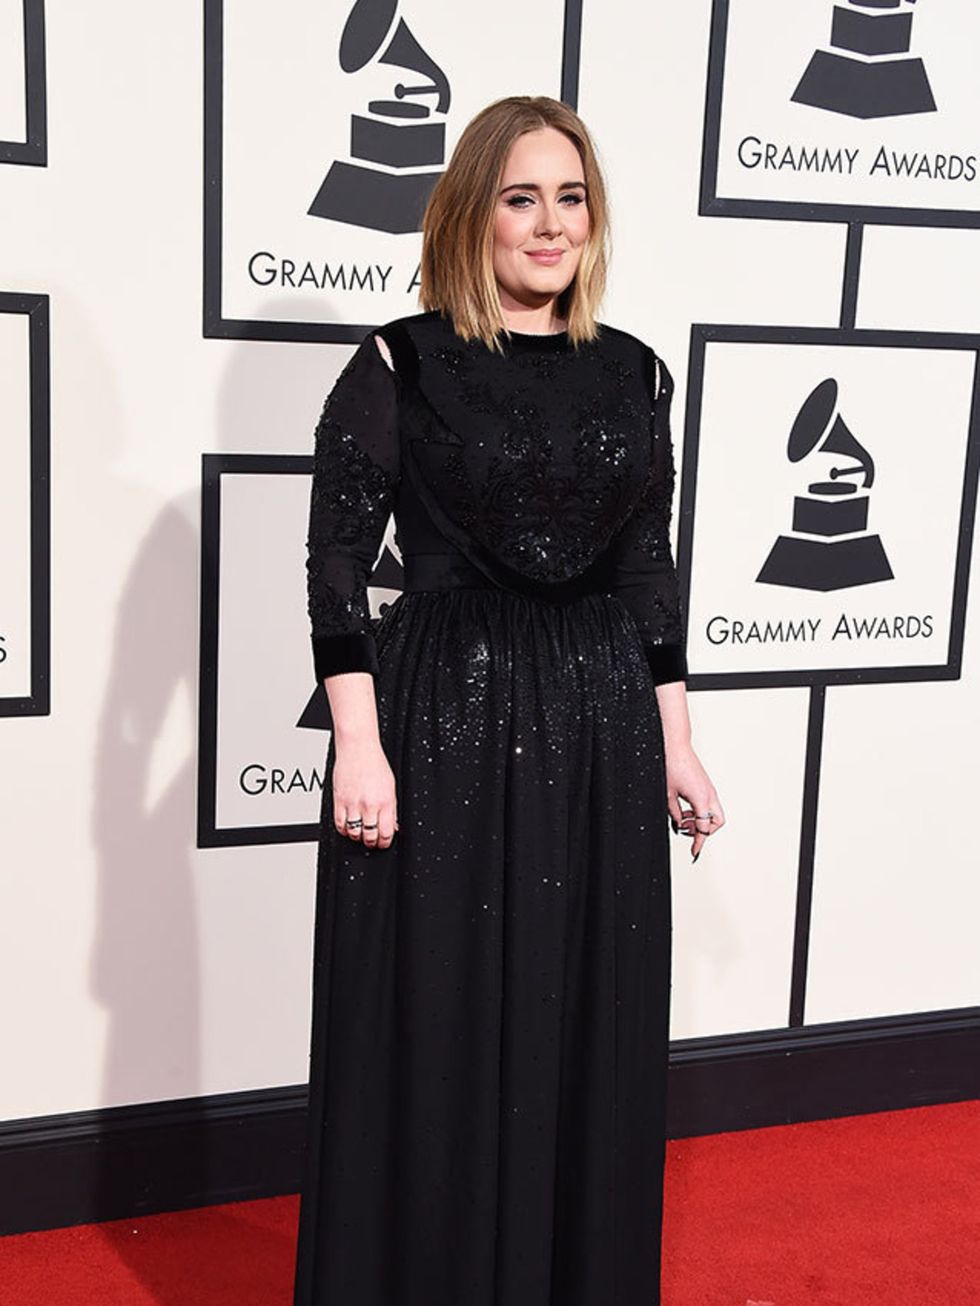 <p>Adele in Givenchy Haute Couture by Riccardo Tisci at the Grammy Awards 2016 in LA, February 2016.</p>